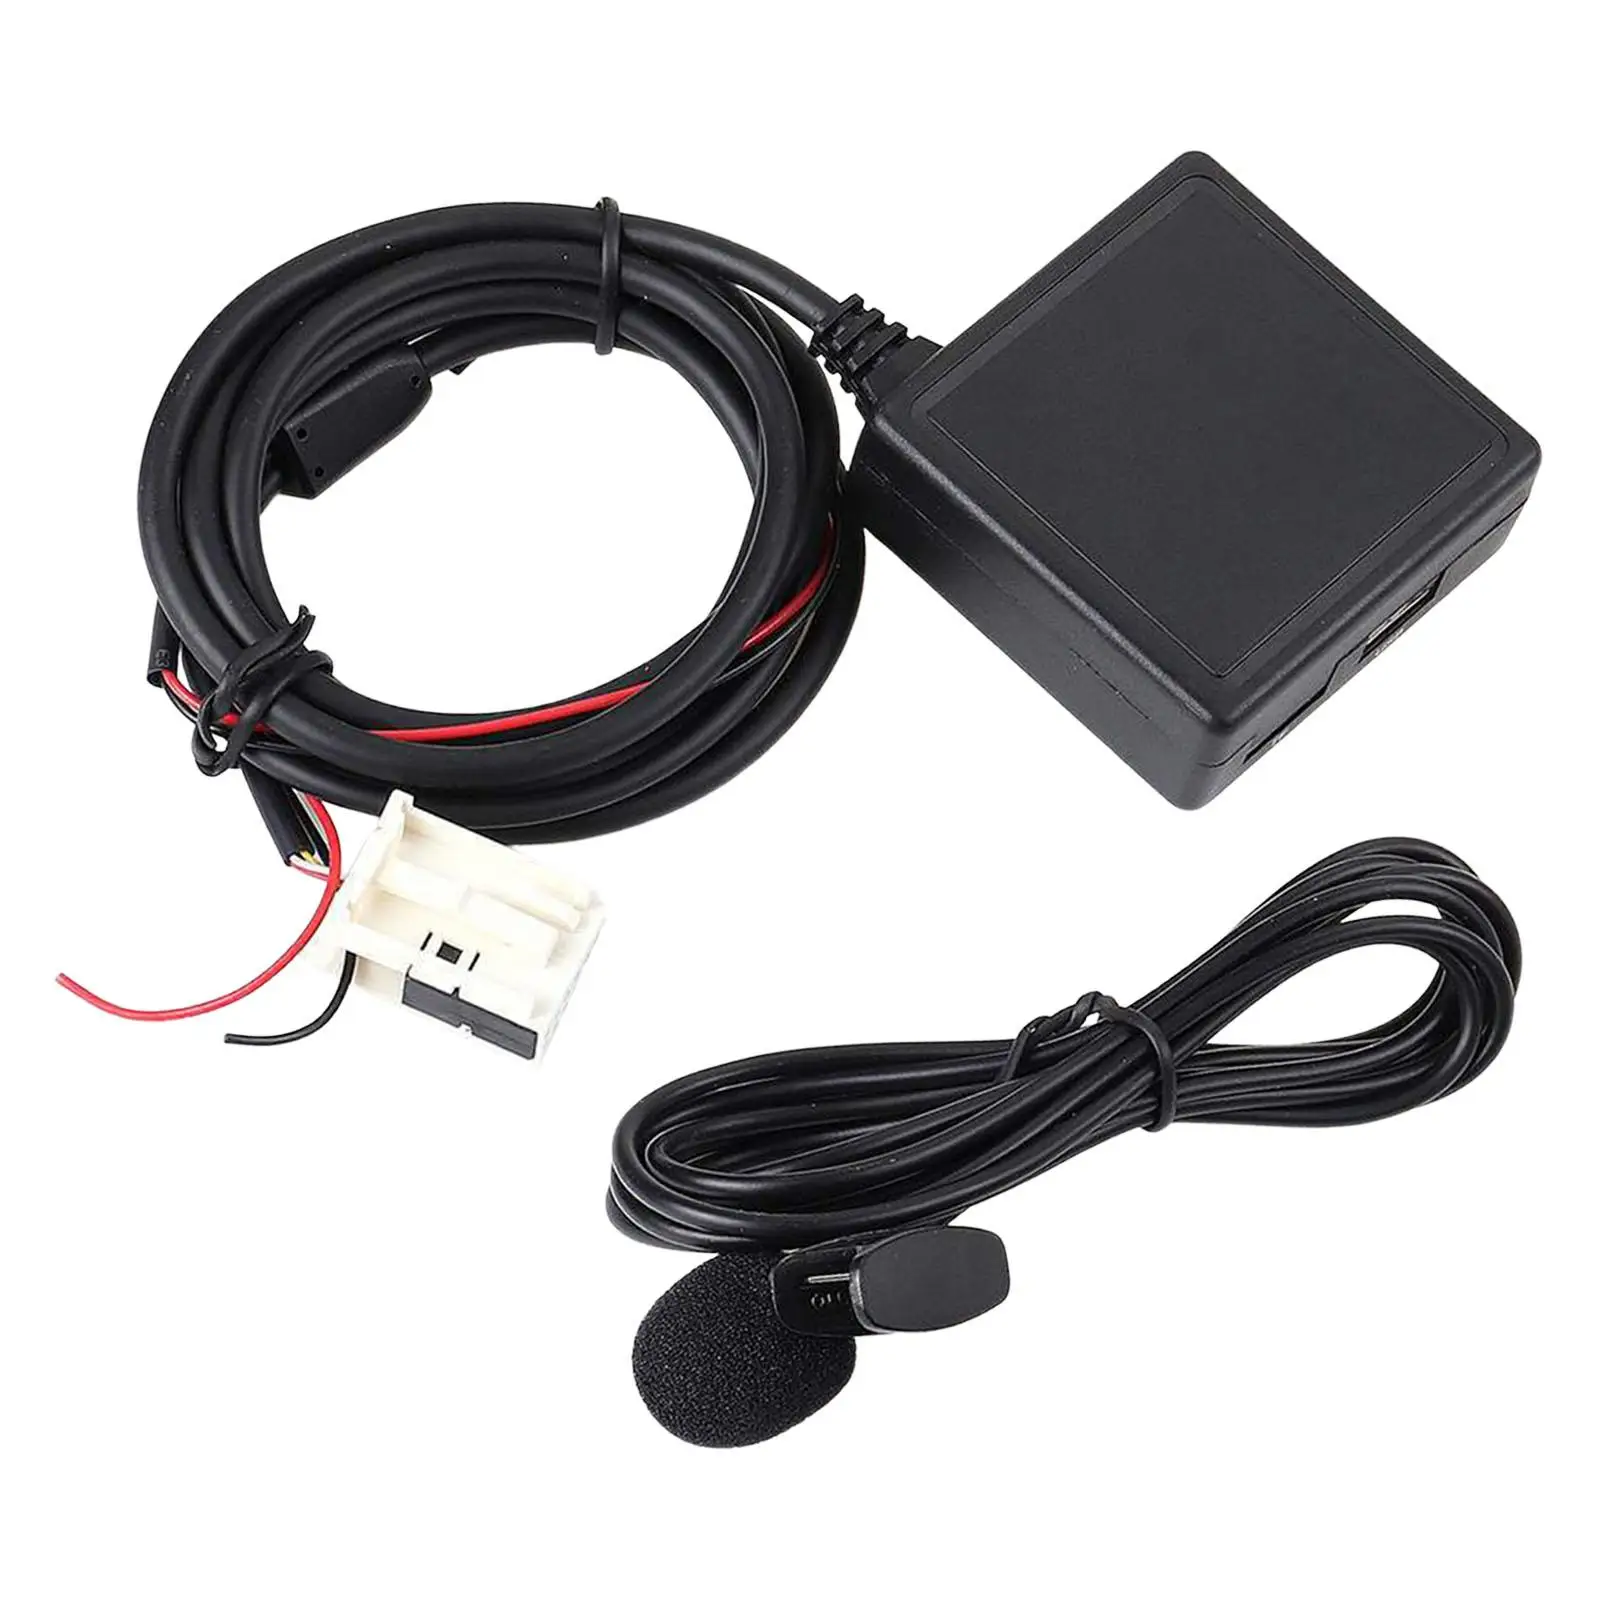 Car AUX Adaptor Cable with Mic Support TF Card for E90 E91 E92